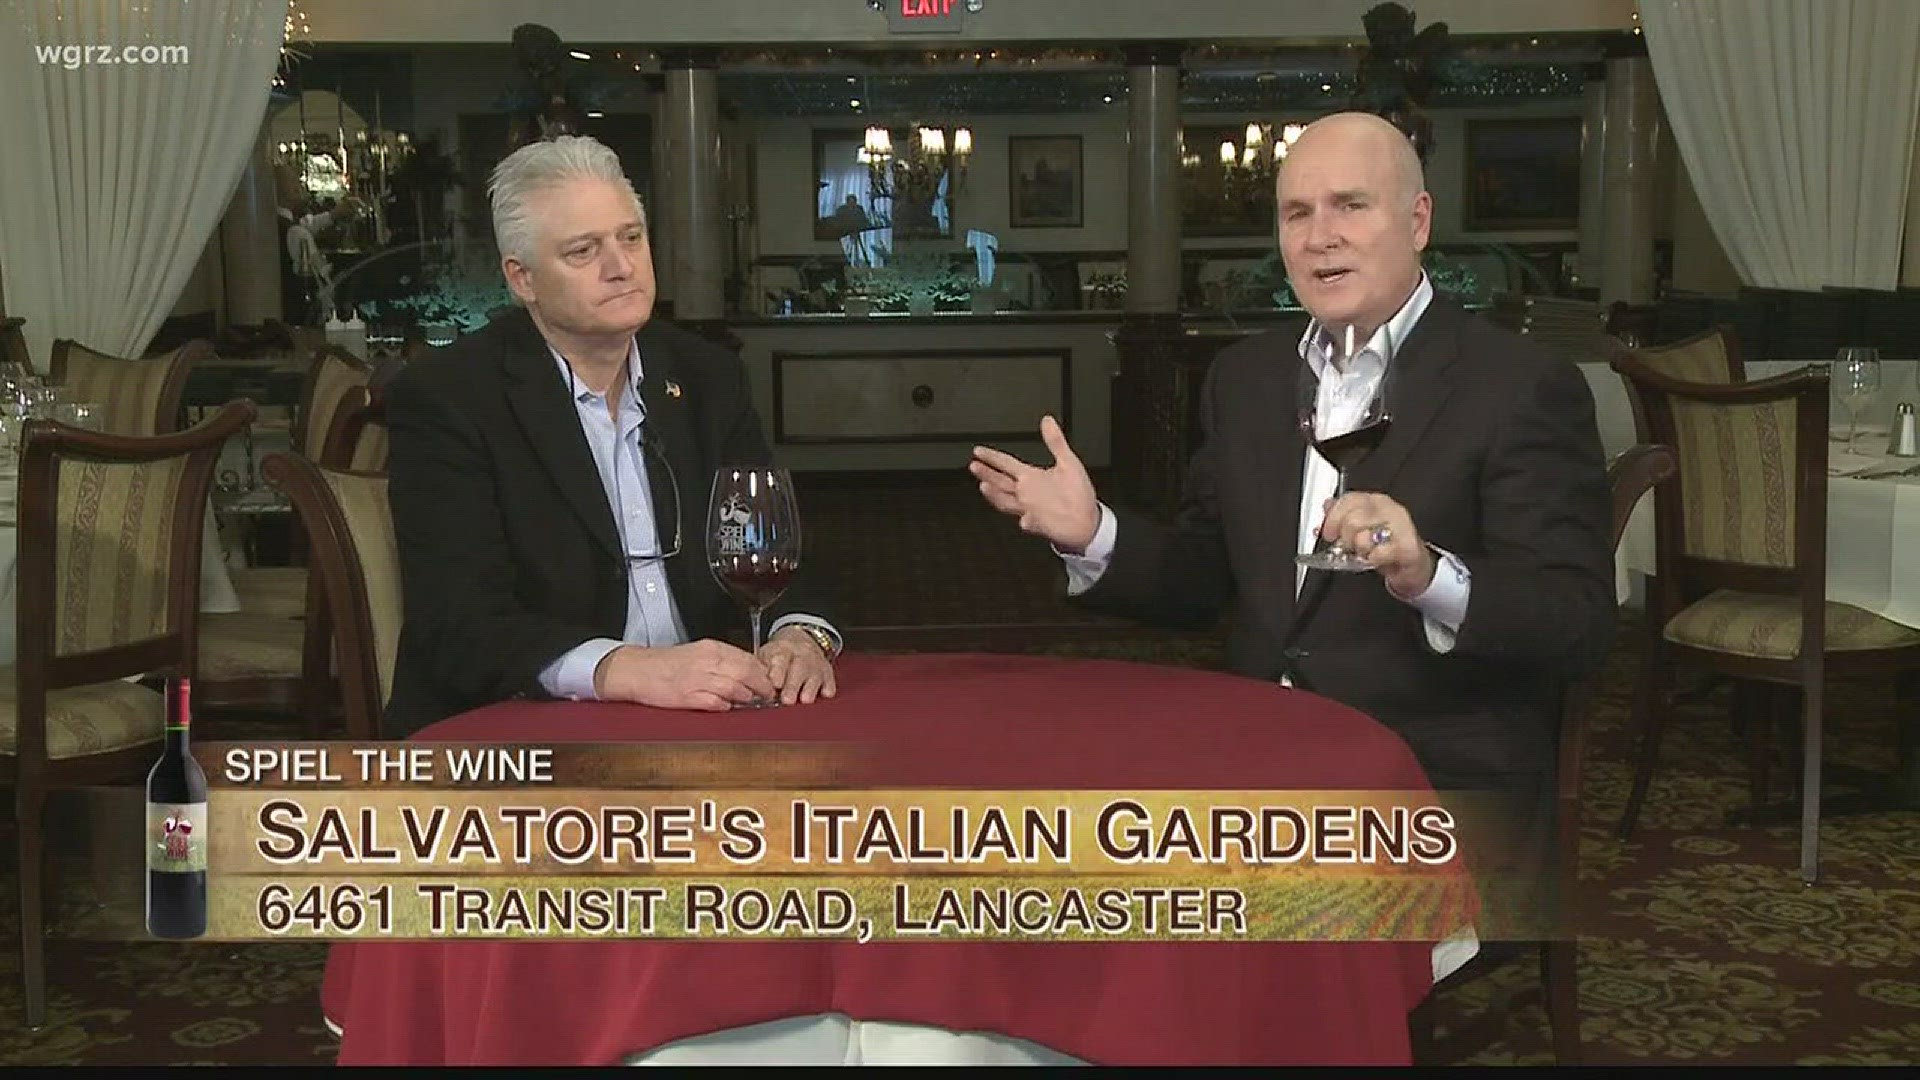 Kevin is joined by Vinny Desiderio of Linguine's Italian Restaurant